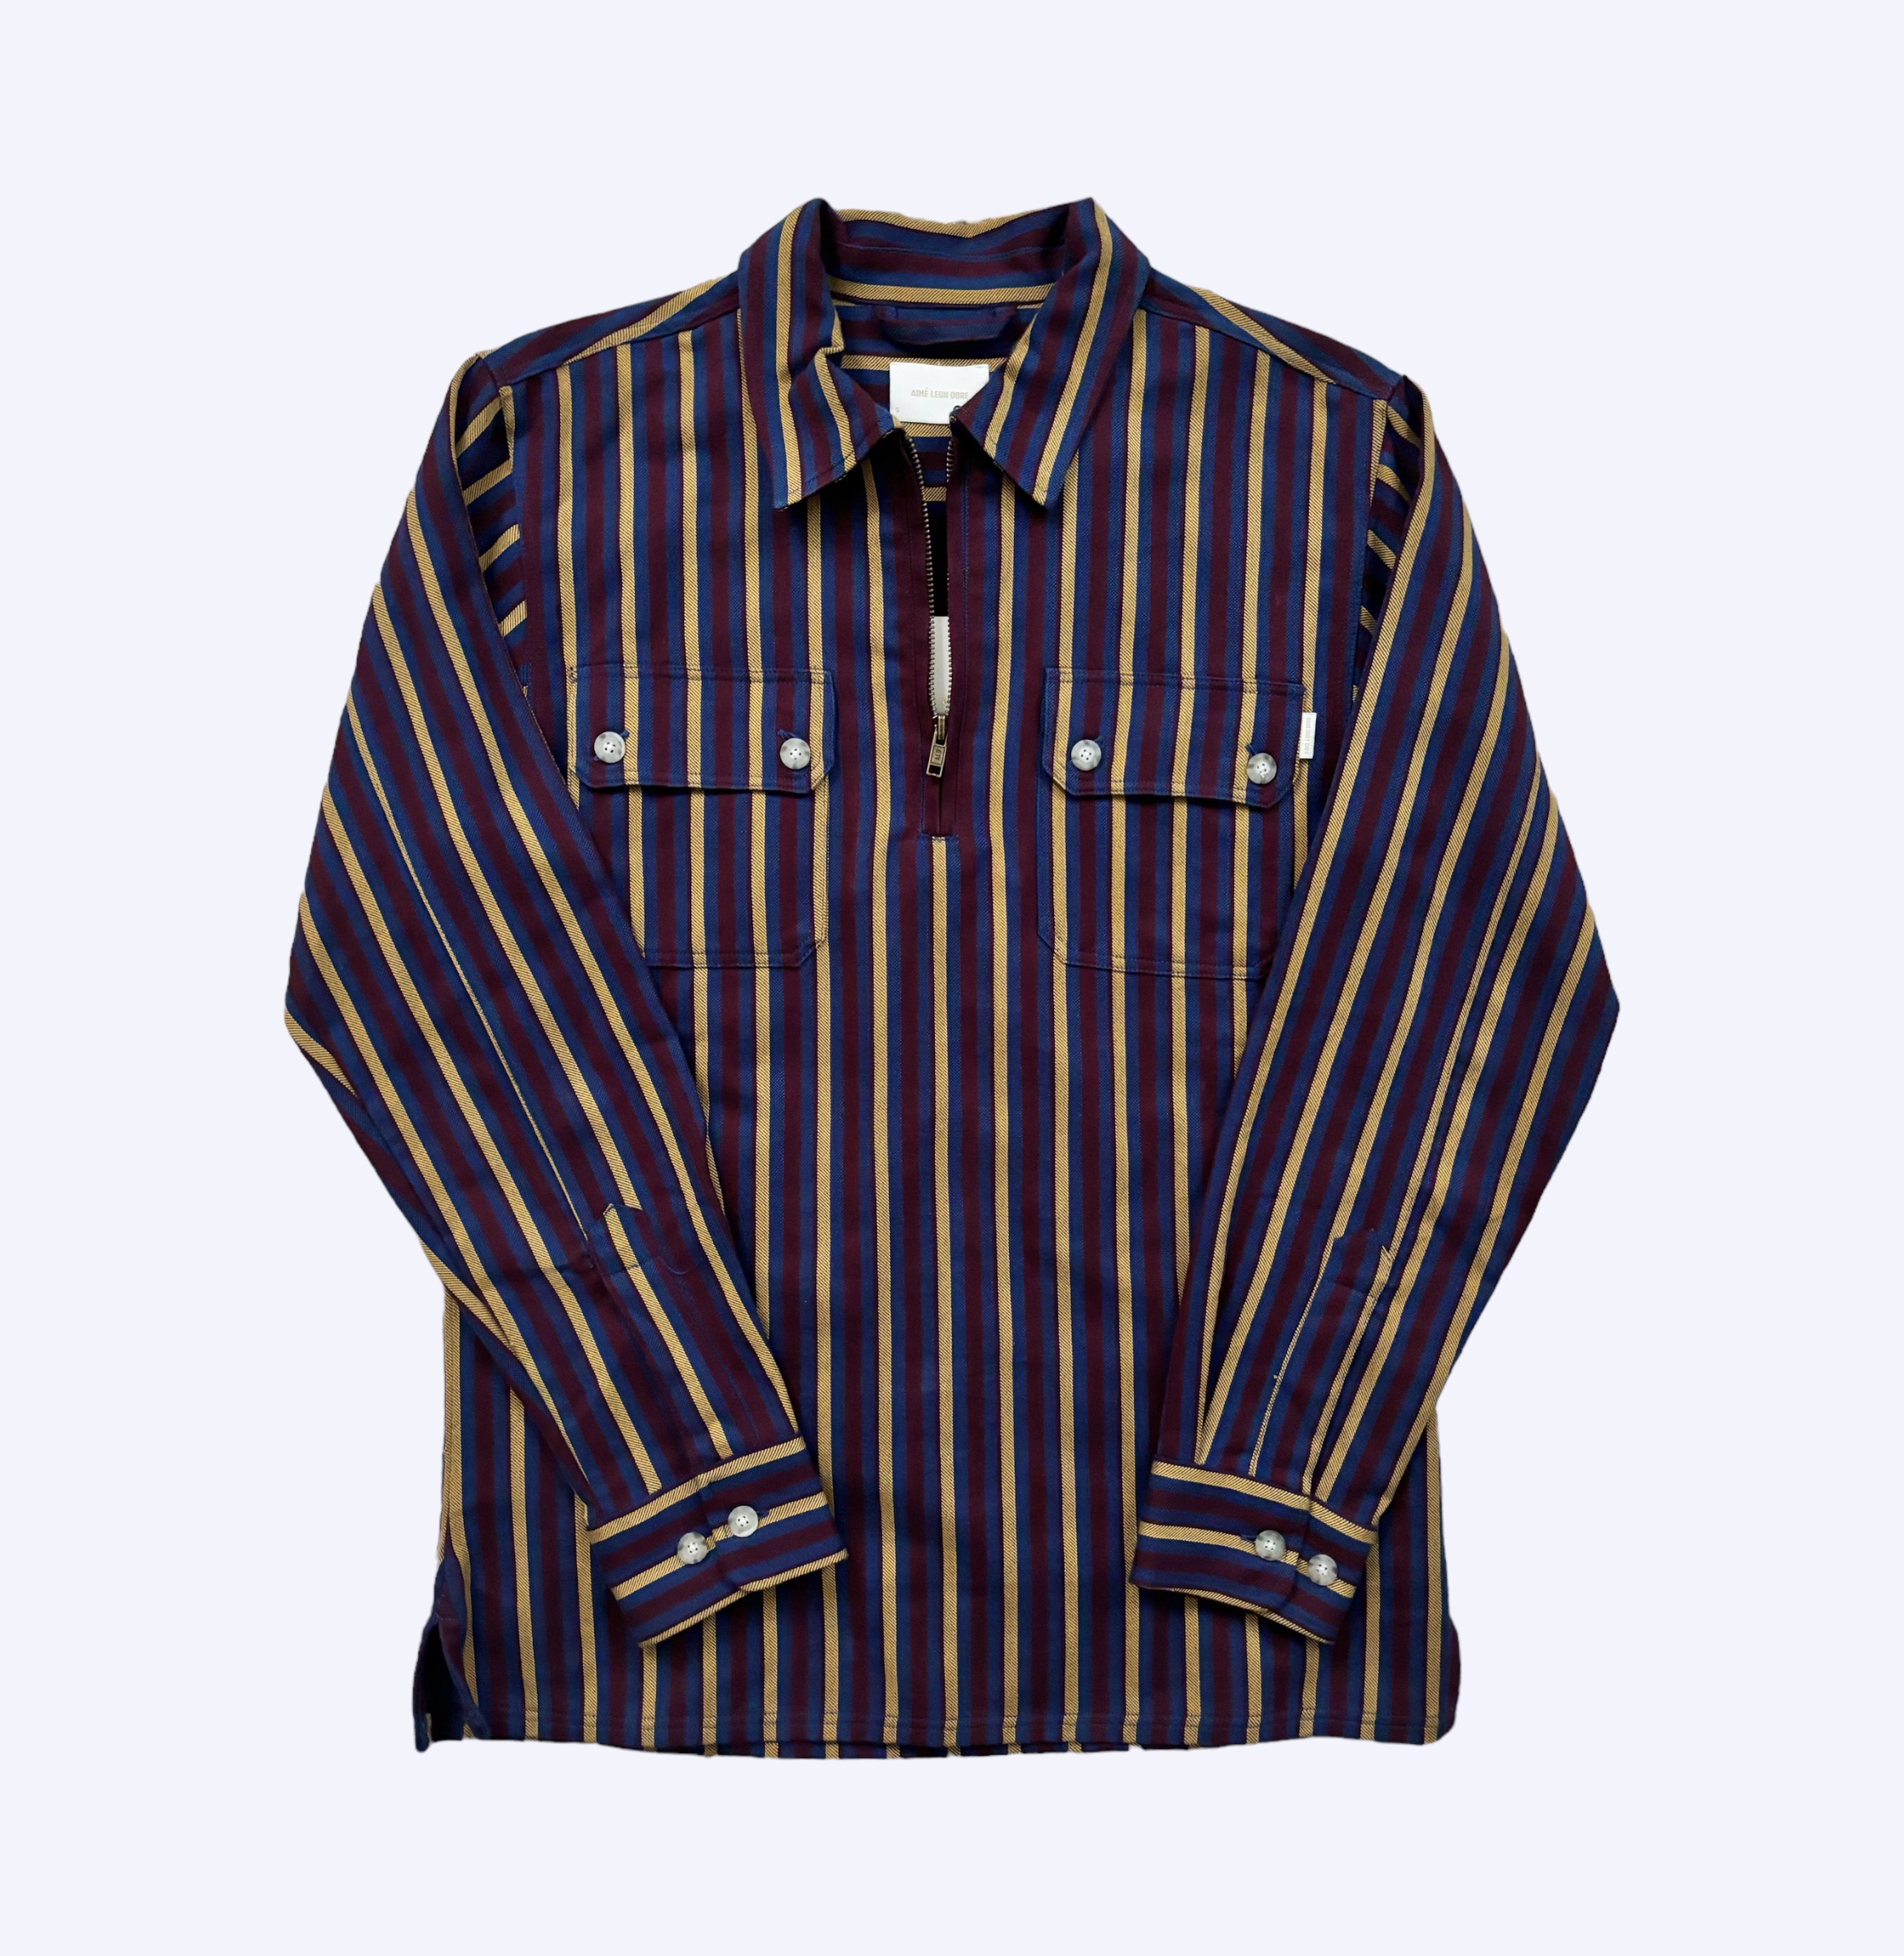 Front of Striped Quarer-Zip work shirt polo by aime